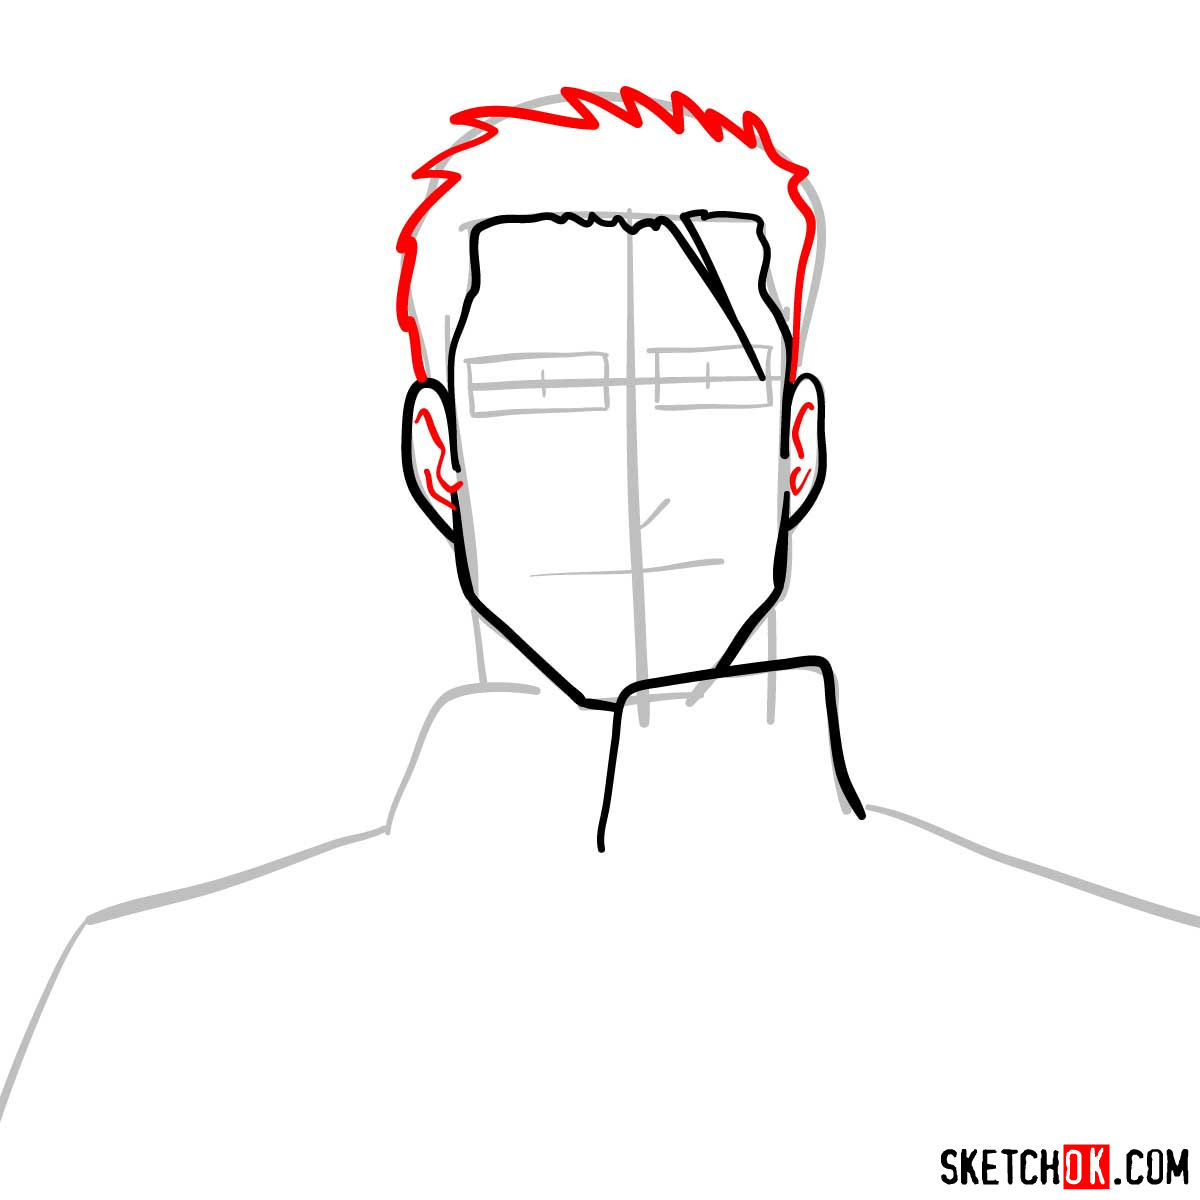 How to draw Maes Hughes from Fullmetal Alchemist anime - step 05